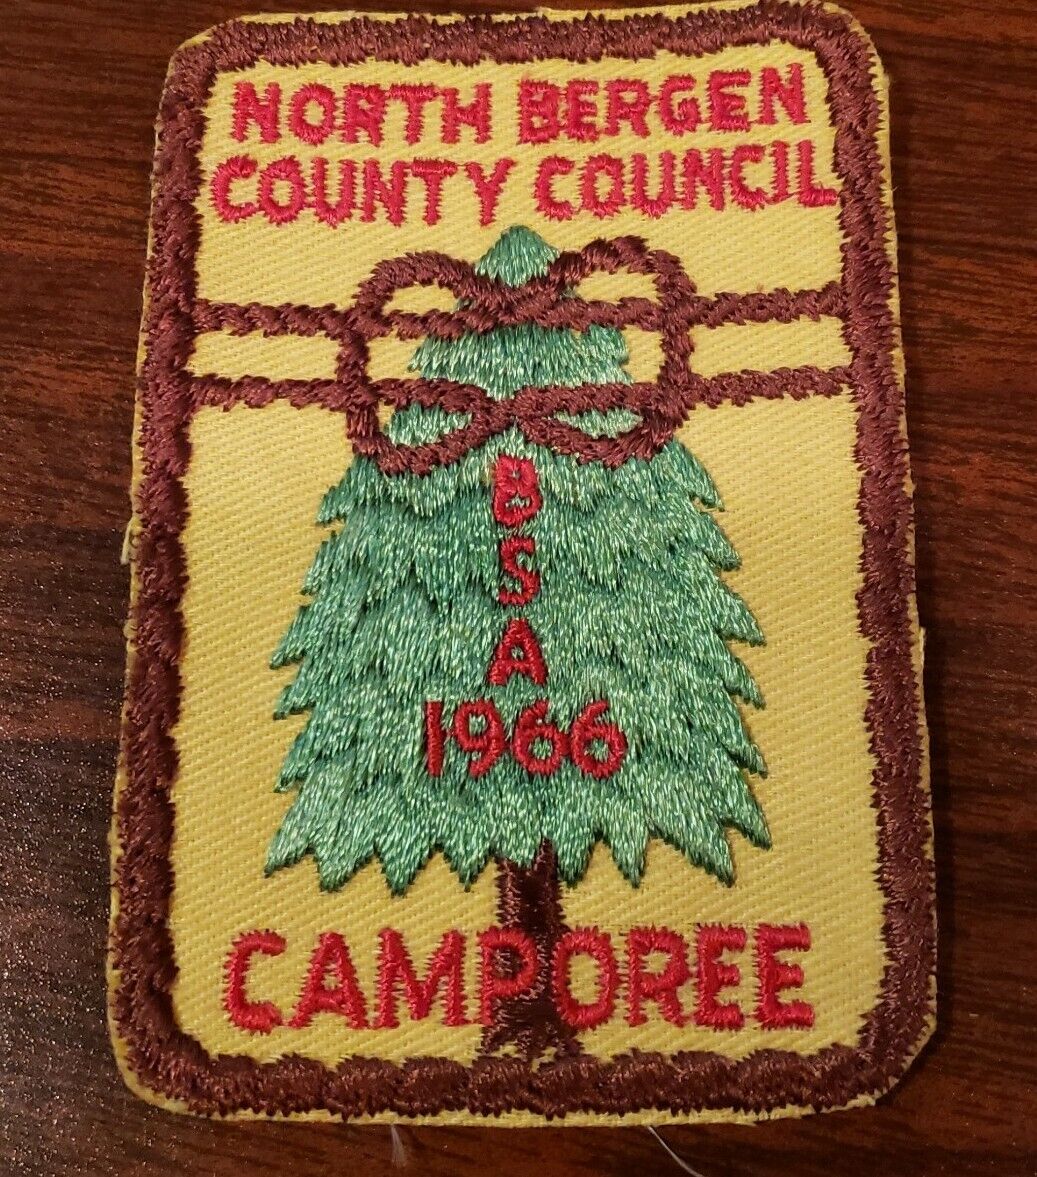 Boy Scout Camporee Patch 1966 North Bergen County Council New Jersey BSA  0066